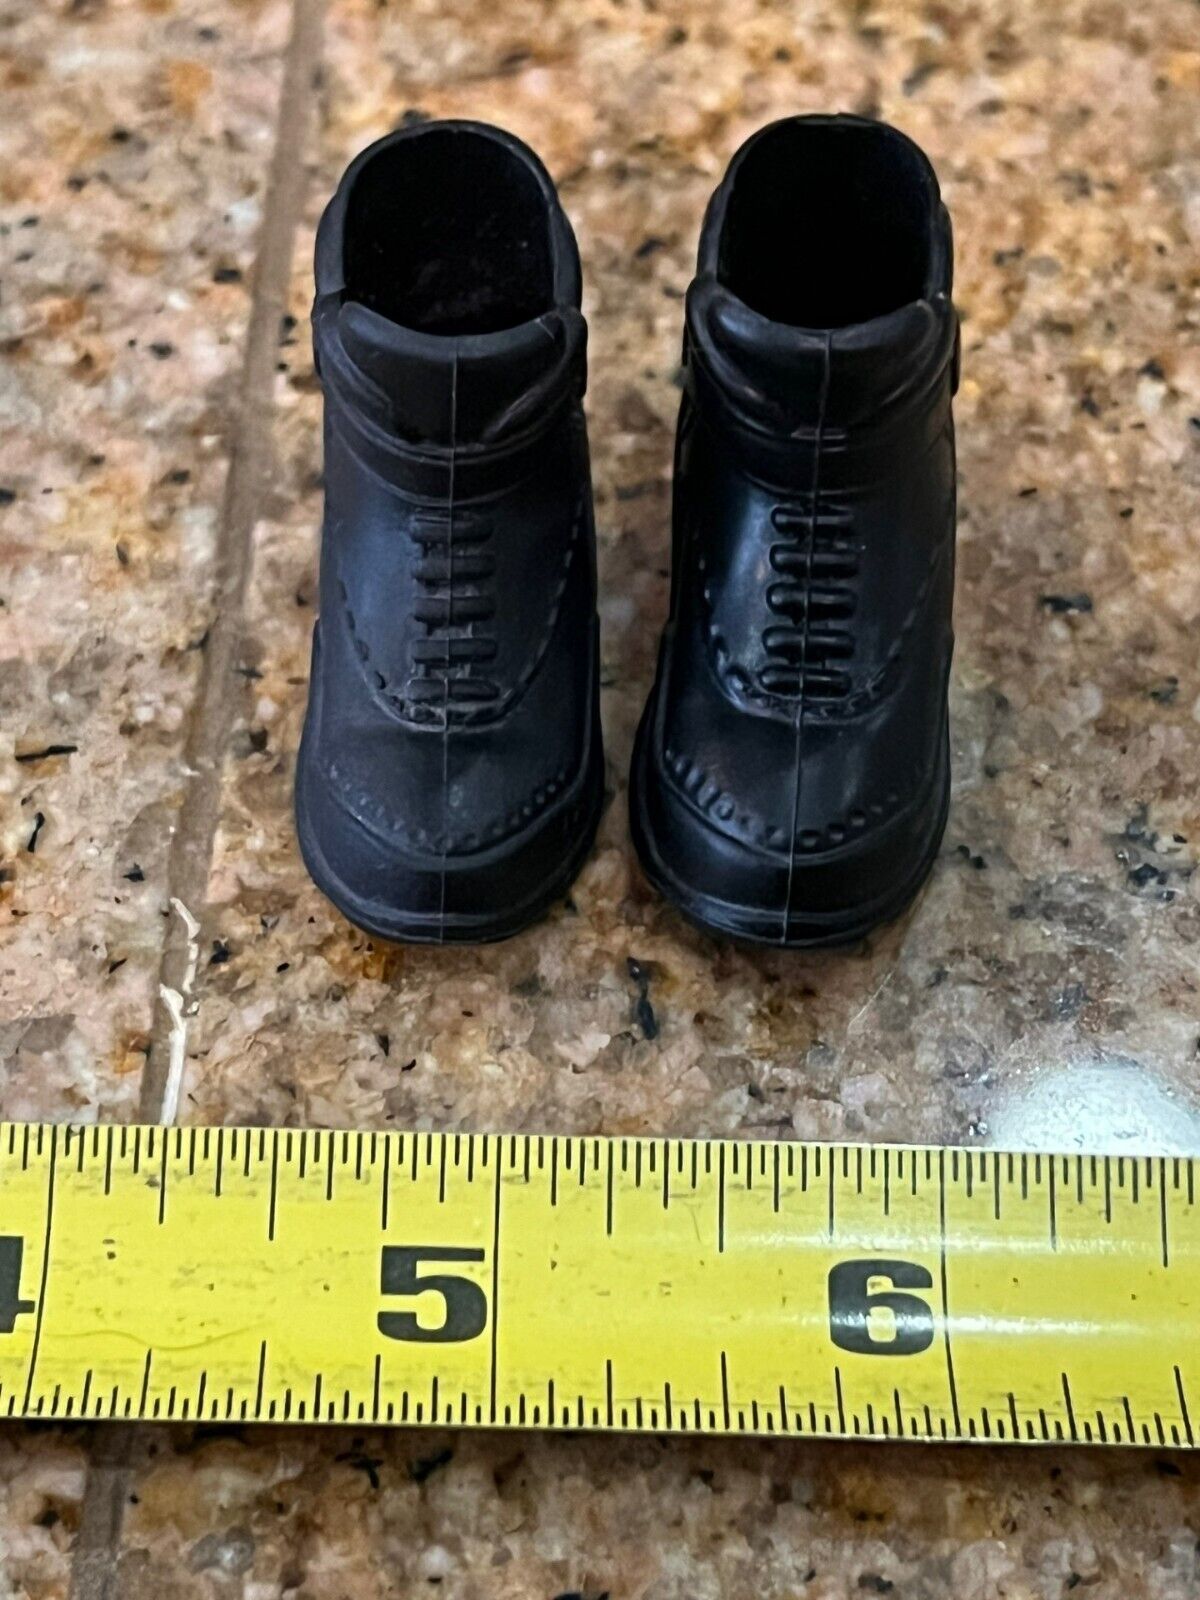 1/6 scale G.I. Joe  action man black high top sneakers shoes boots